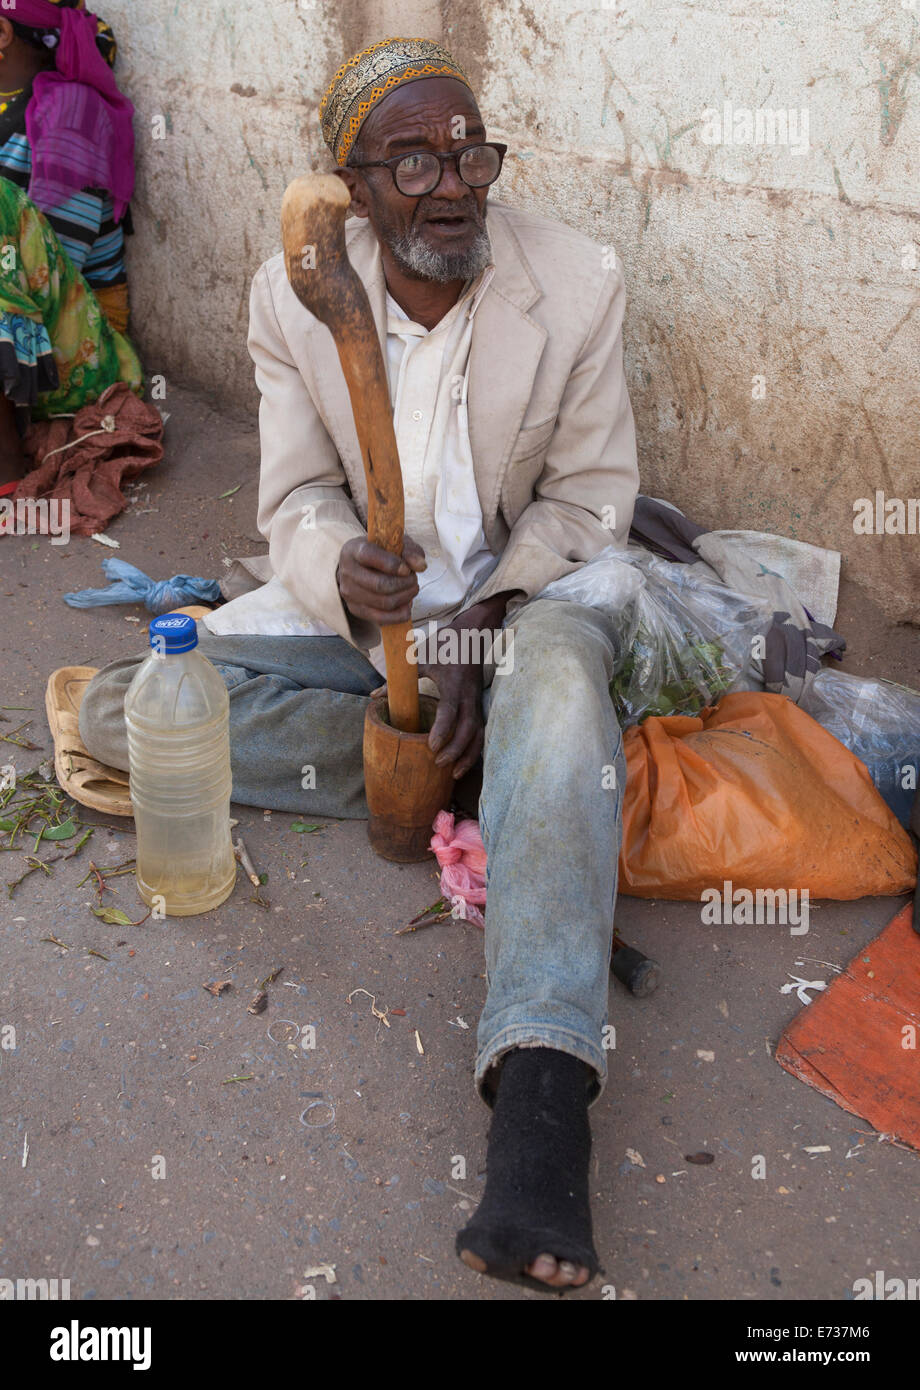 Old Man Without Teeth Crashing Some Qat In The Street, Harar, Ethiopia Stock Photo